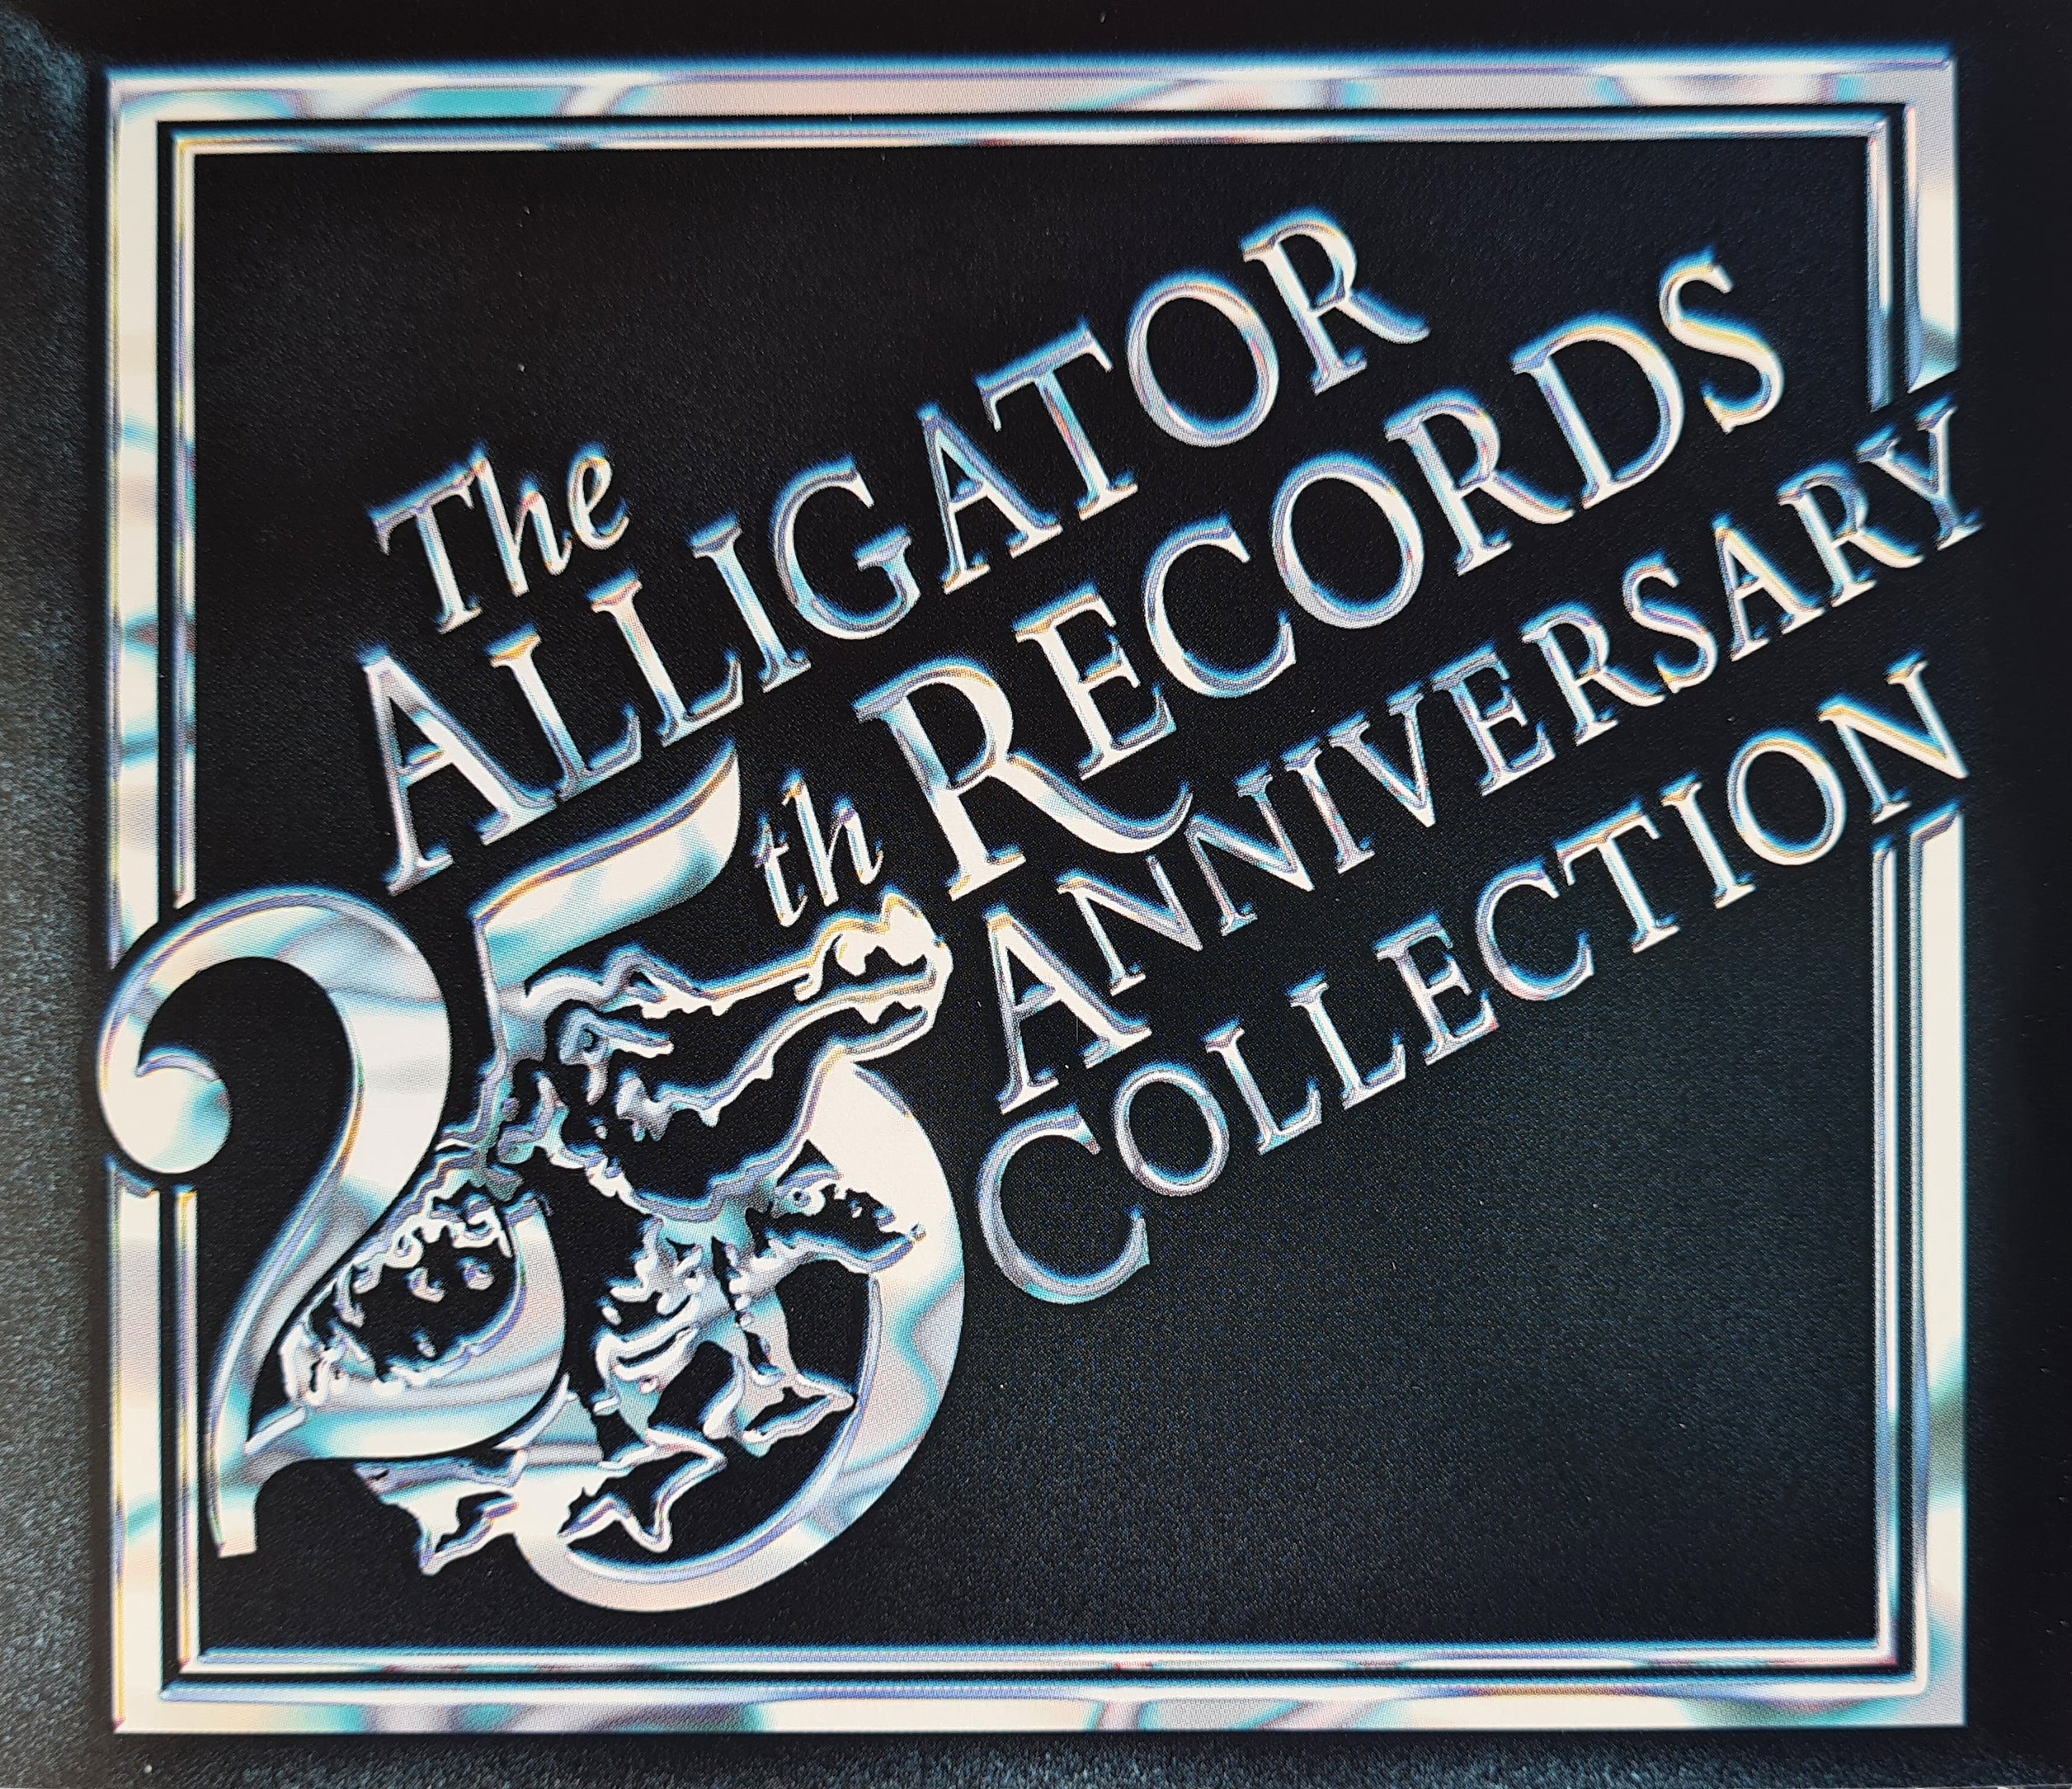 The Alligator Records - 25th Anniversary Collection (CD)